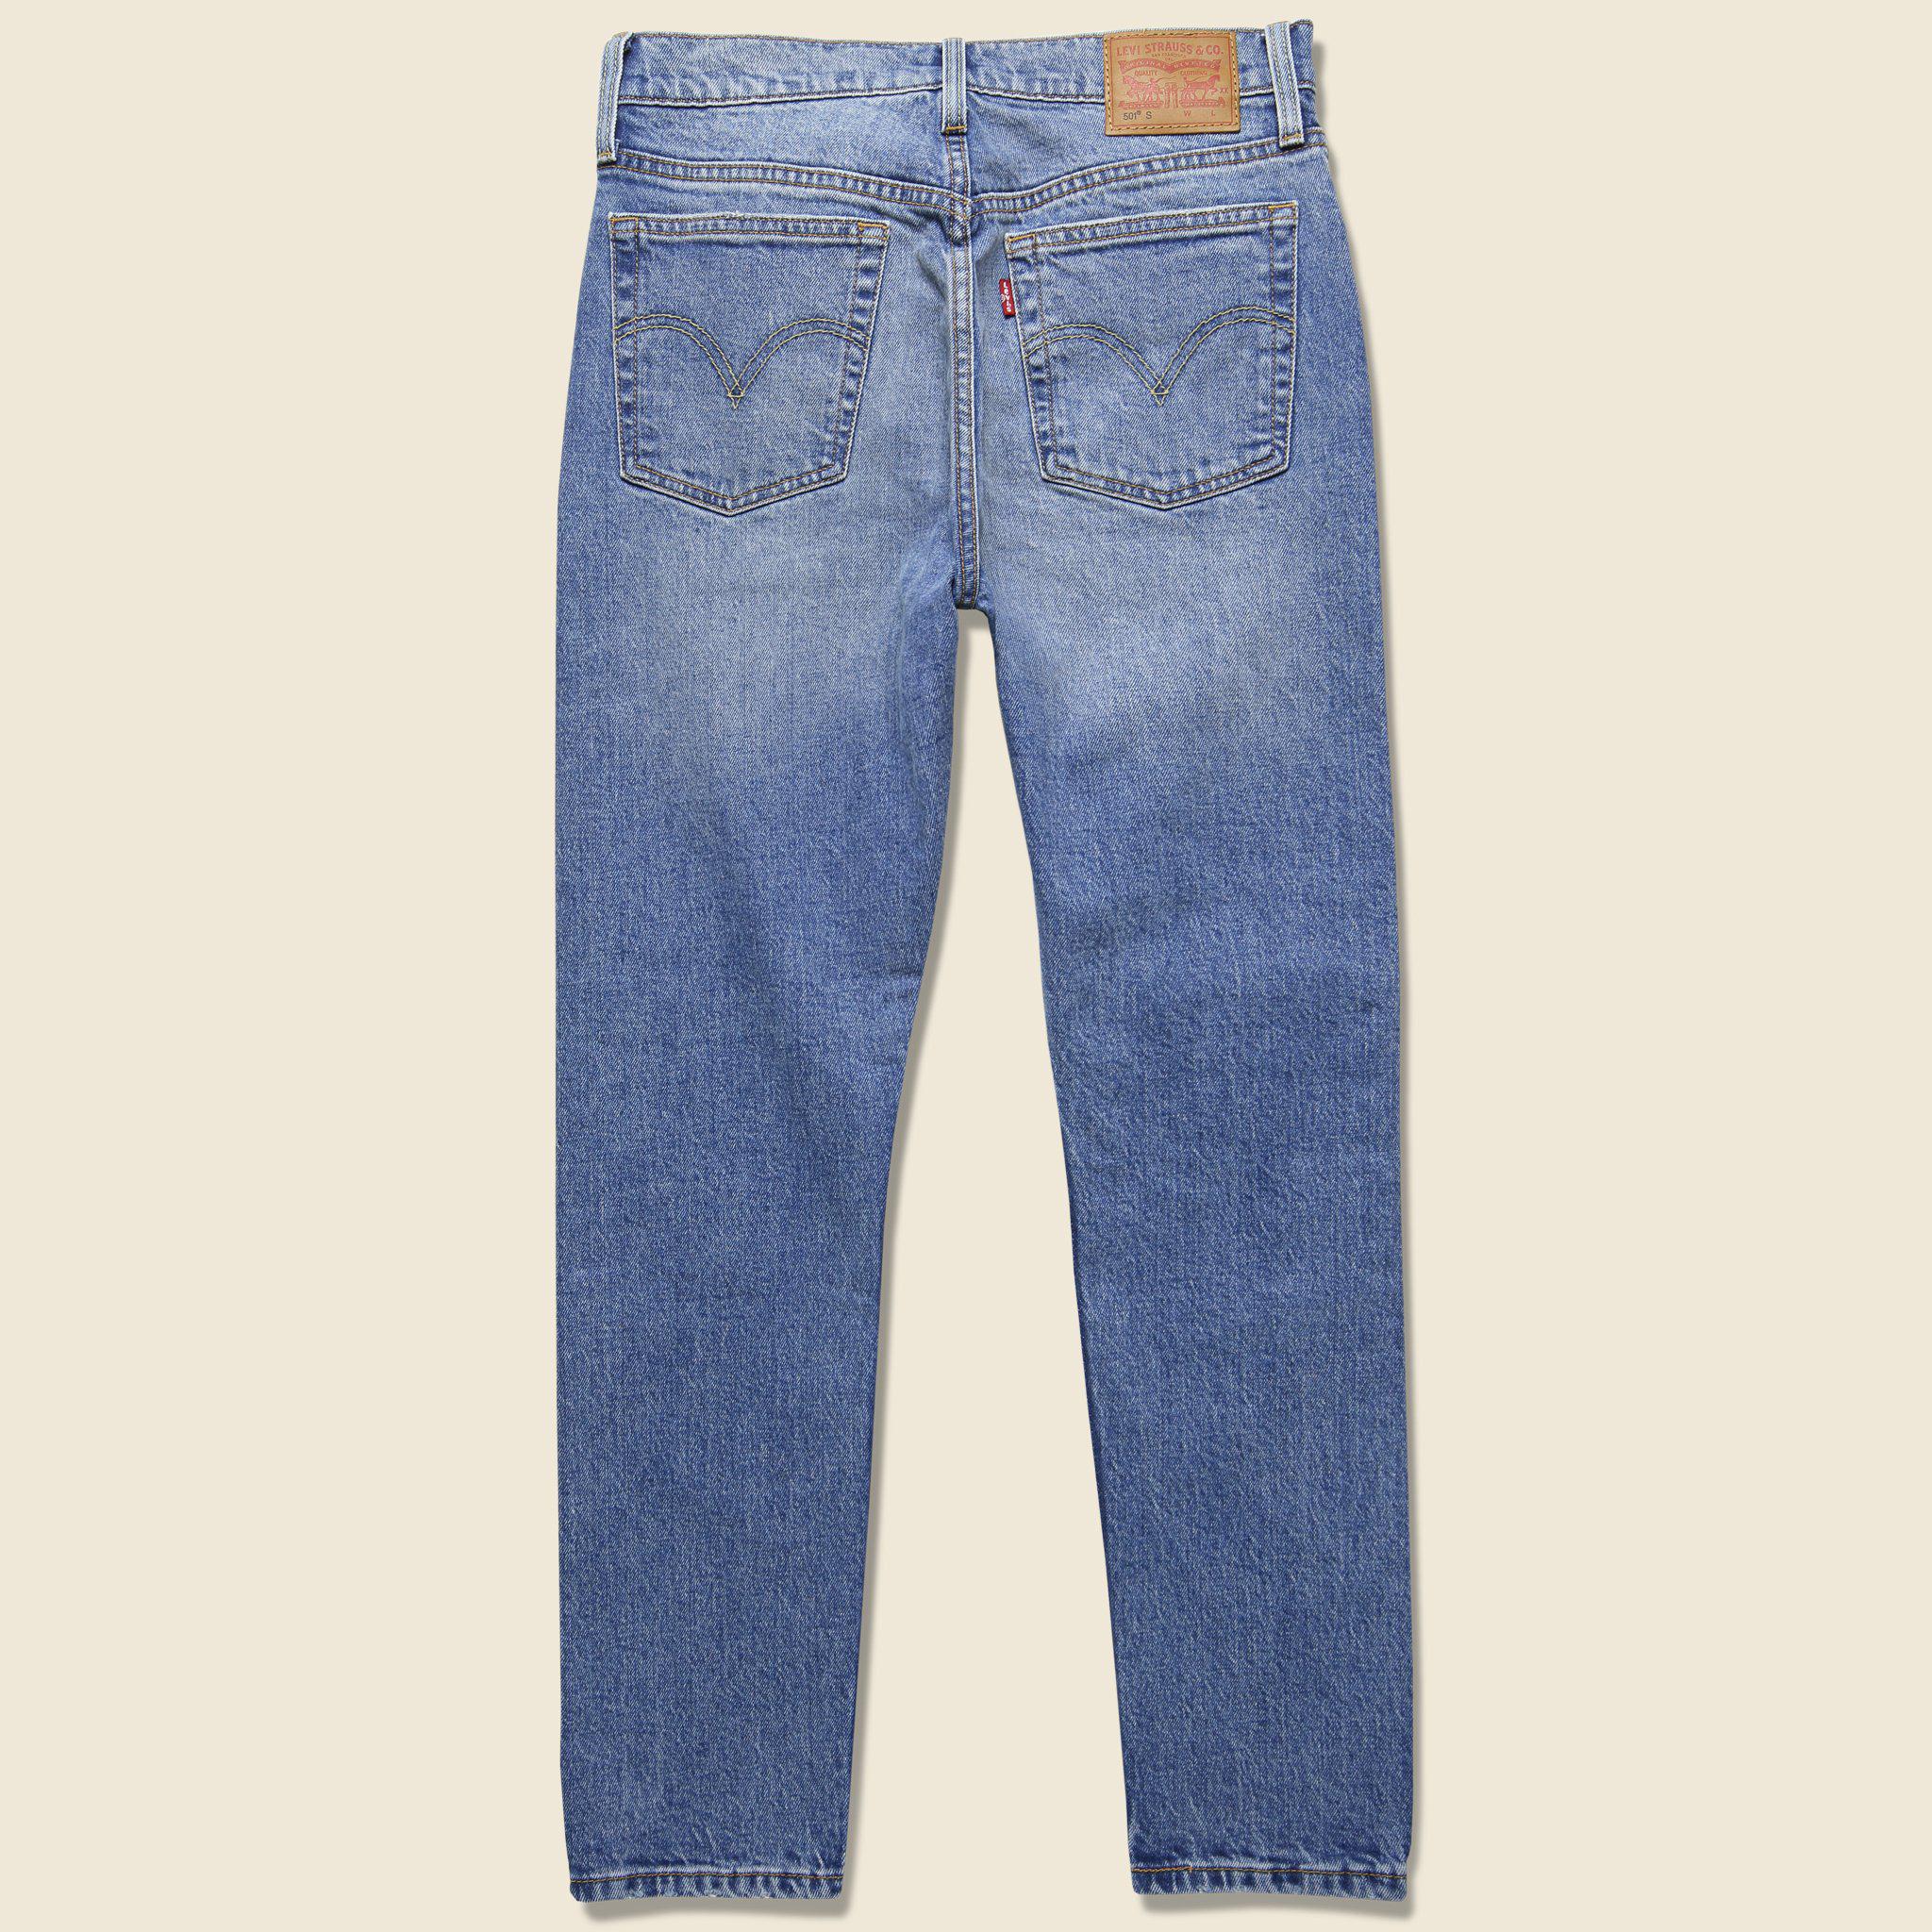 levis 501 leave a trace